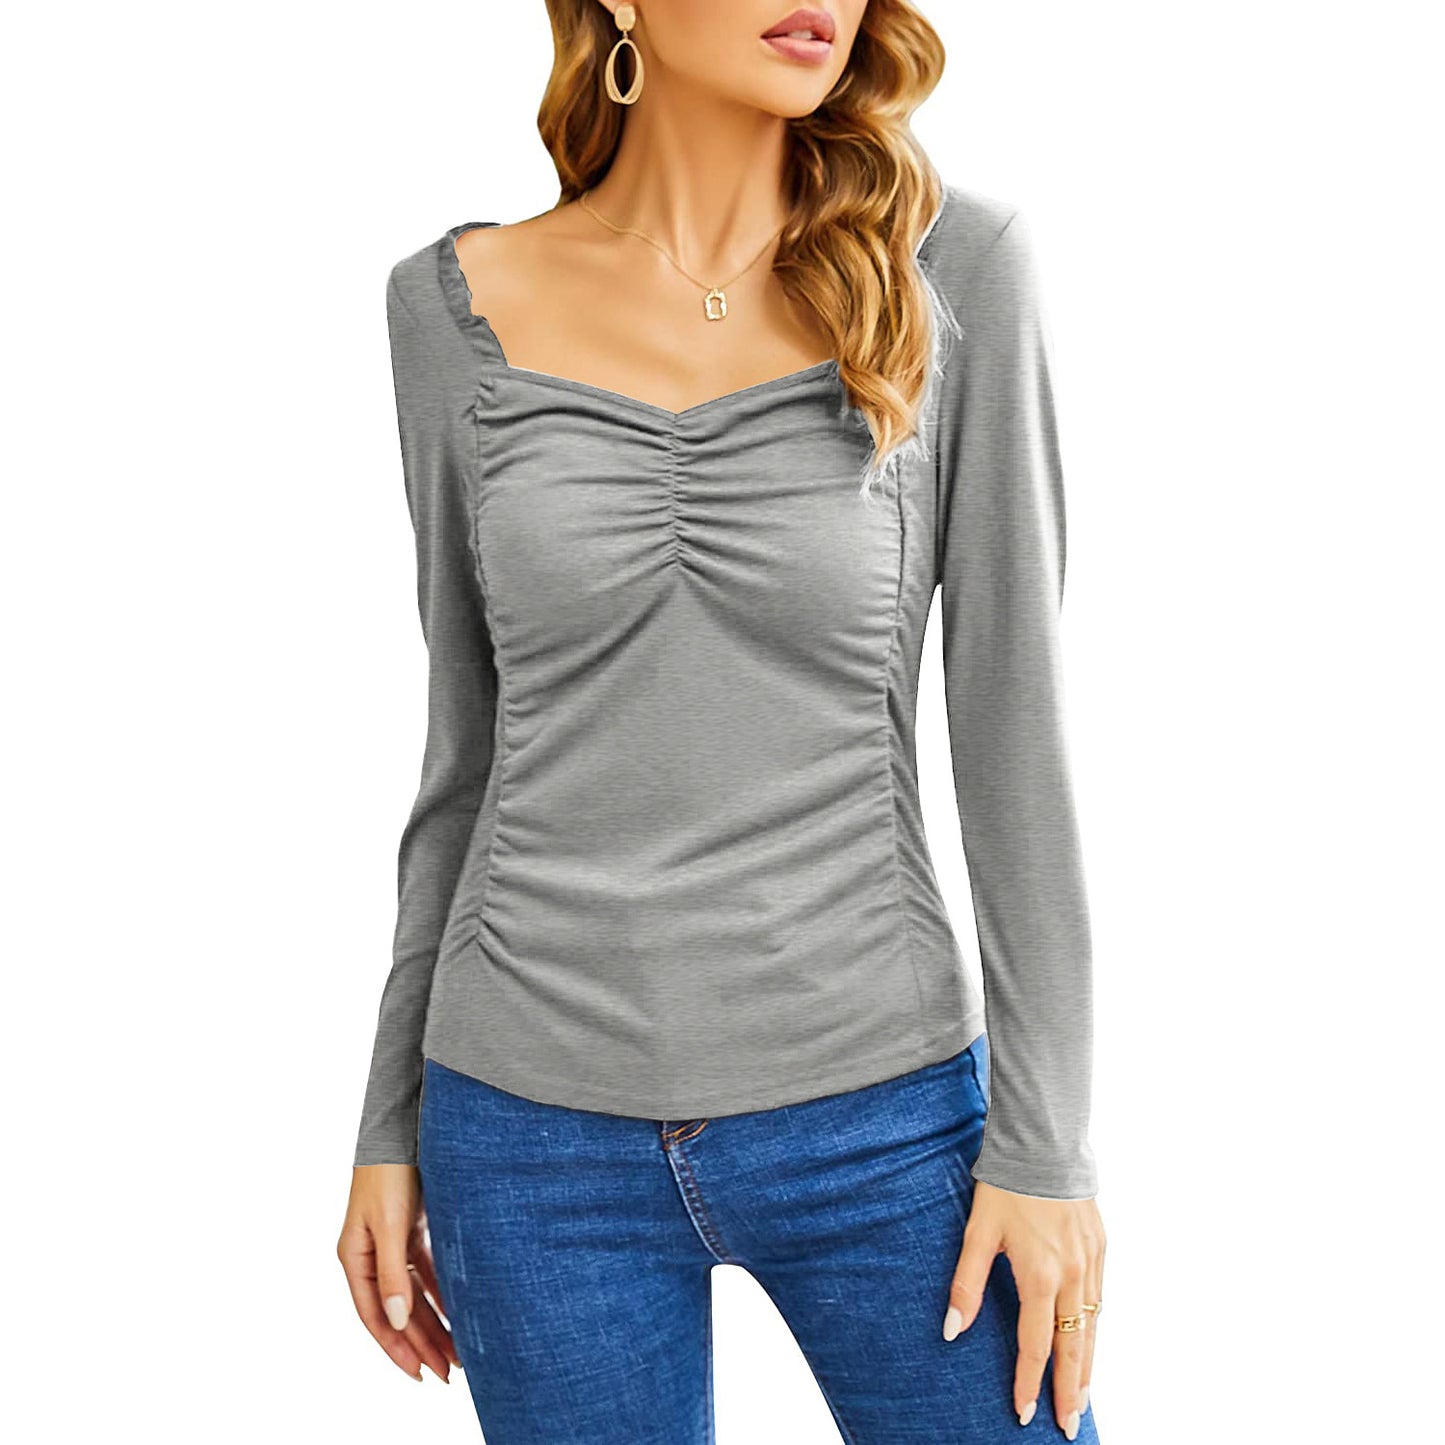 Women's Fashion Casual Square Collar Pleated Slim-fit Long Sleeve